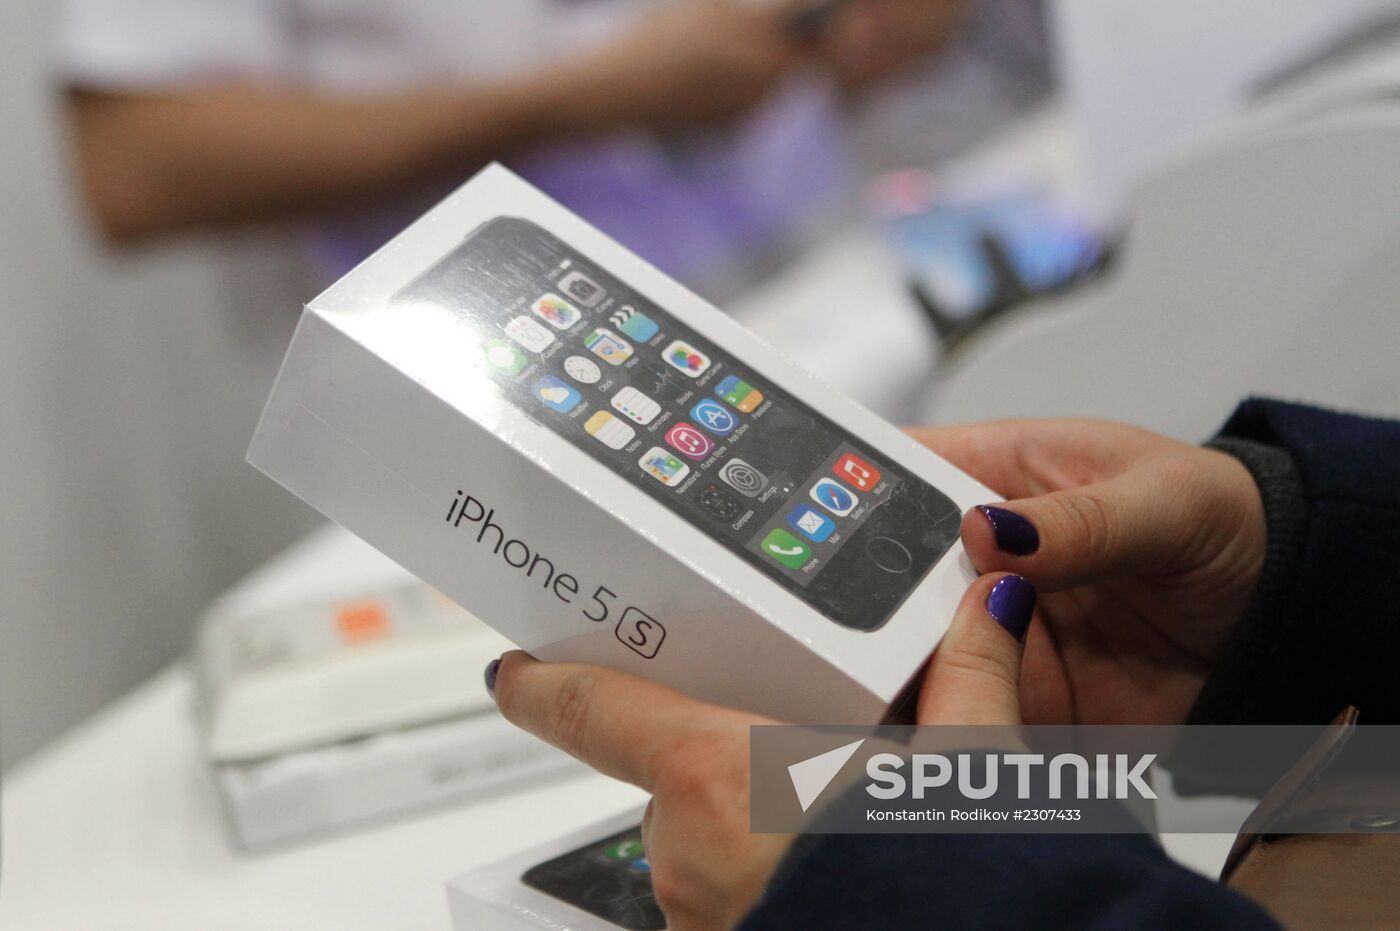 Official start of sales of iPhone 5s and iPhone 5c in Moscow